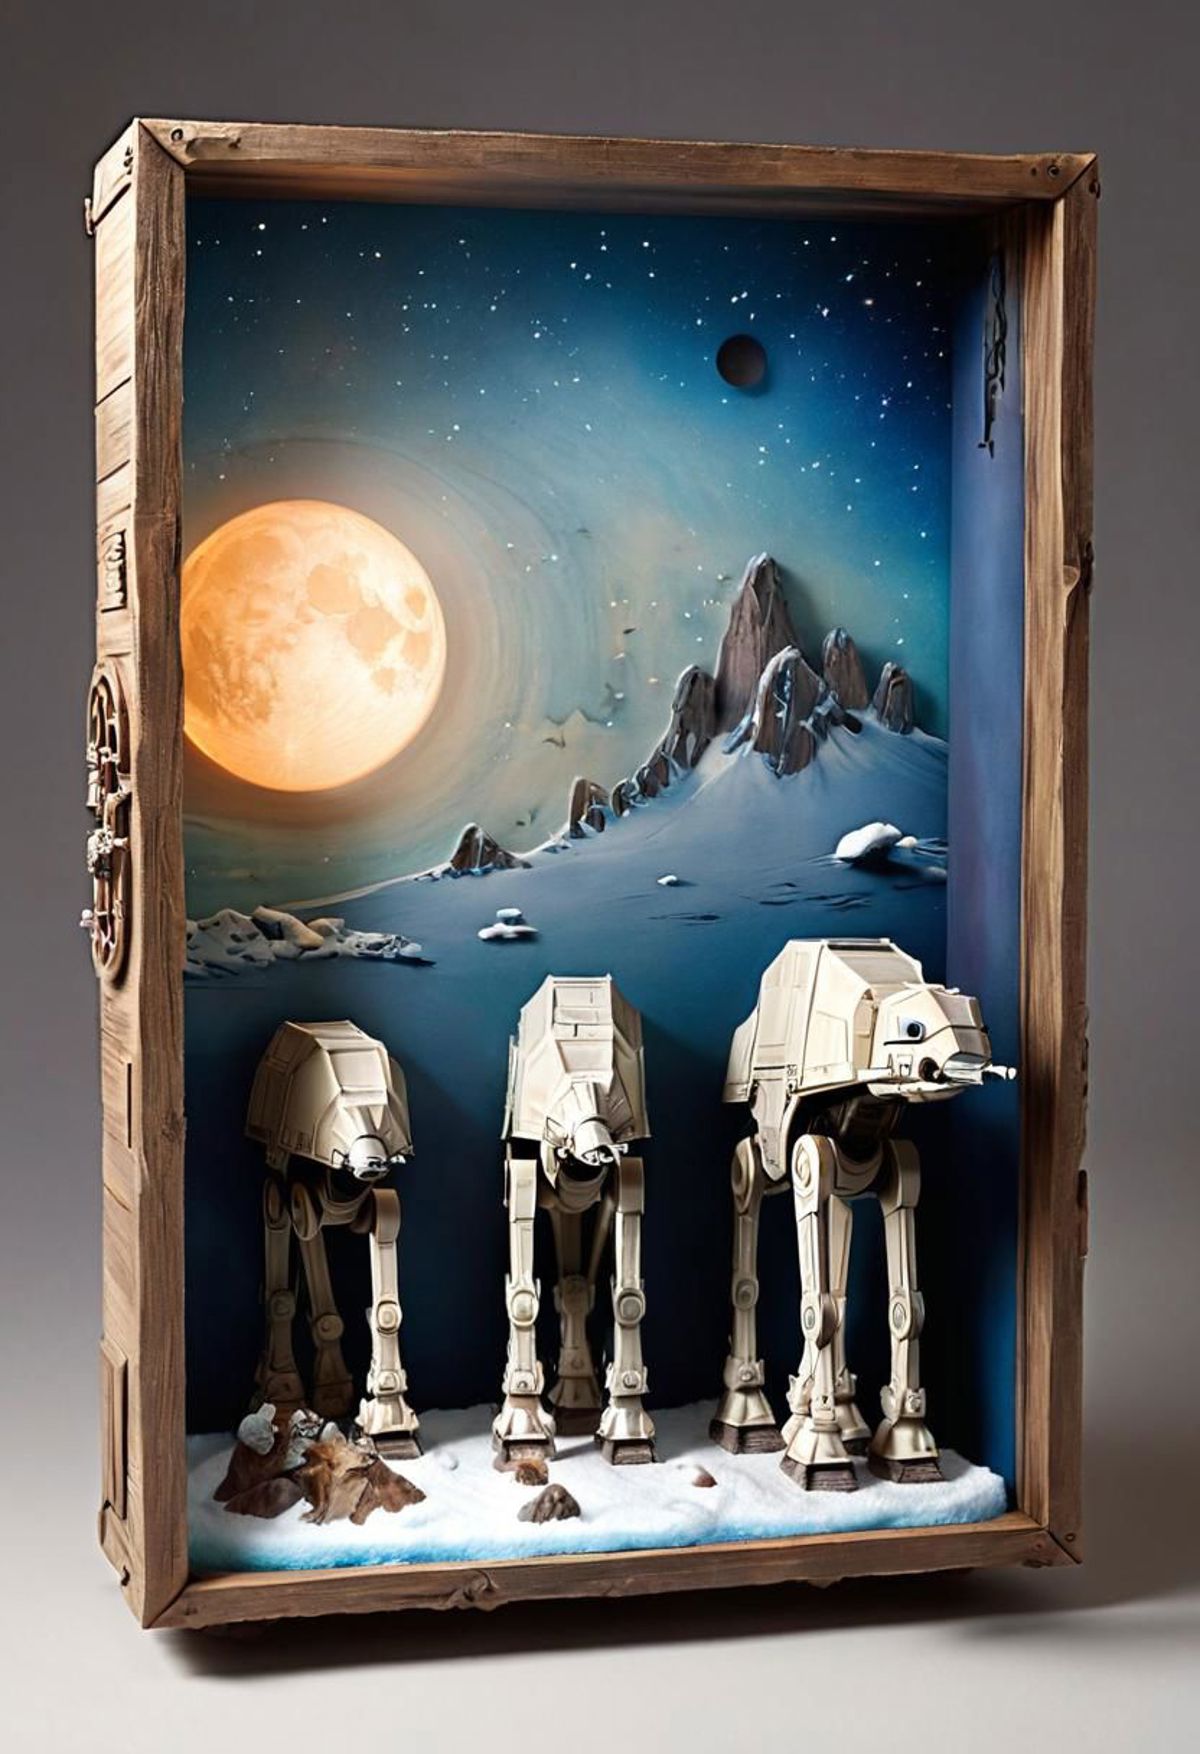 A painting of three AT-AT Walkers with a moon in the background.